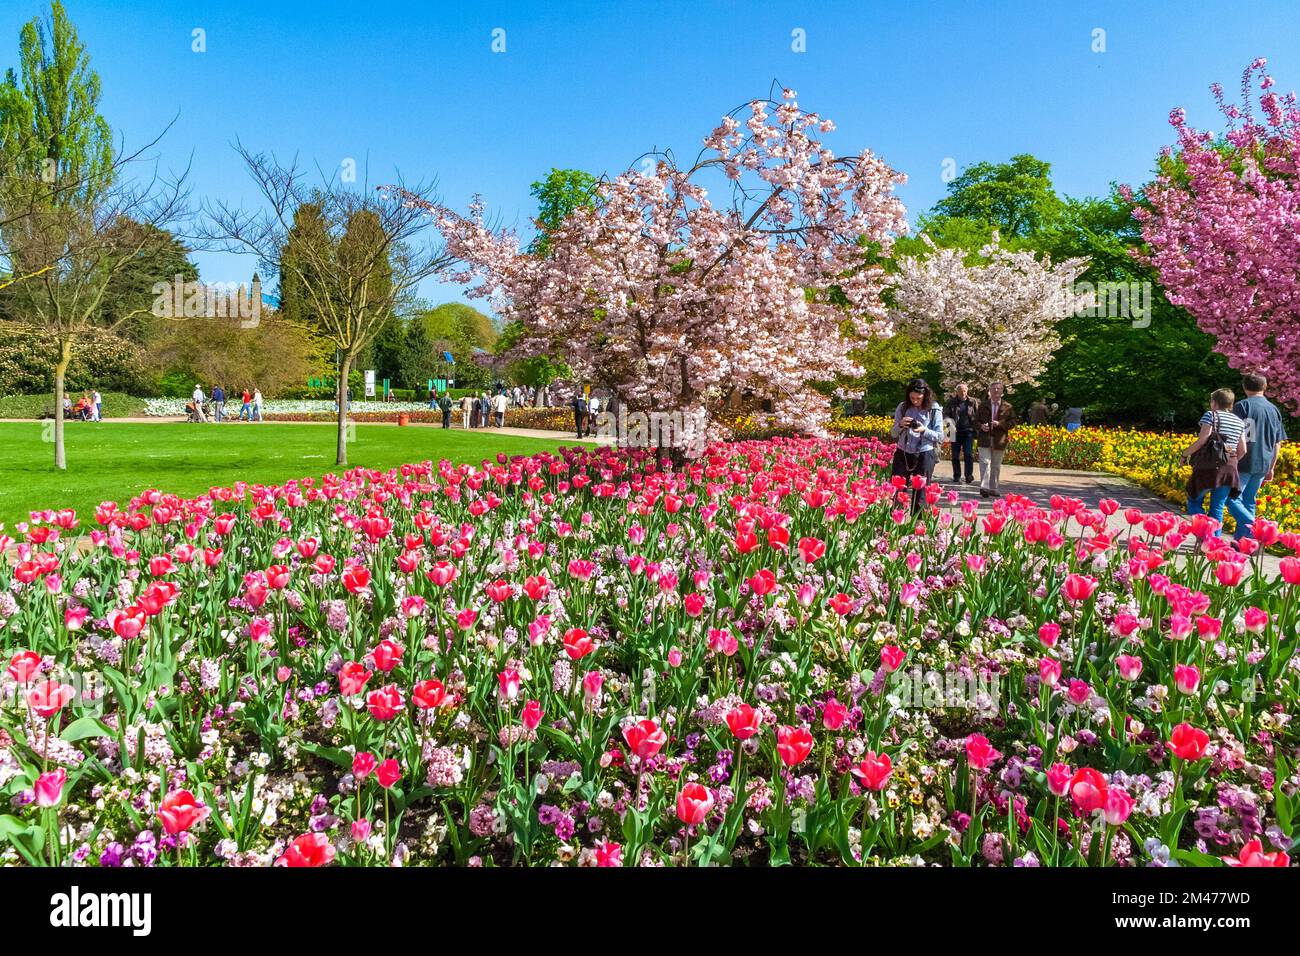 Picturesque view in the park Luisenpark in Mannheim, Germany with a flower bed of hyacinths, garden pansies and pink tulips 'Dynasty', and a blooming... Stock Photo